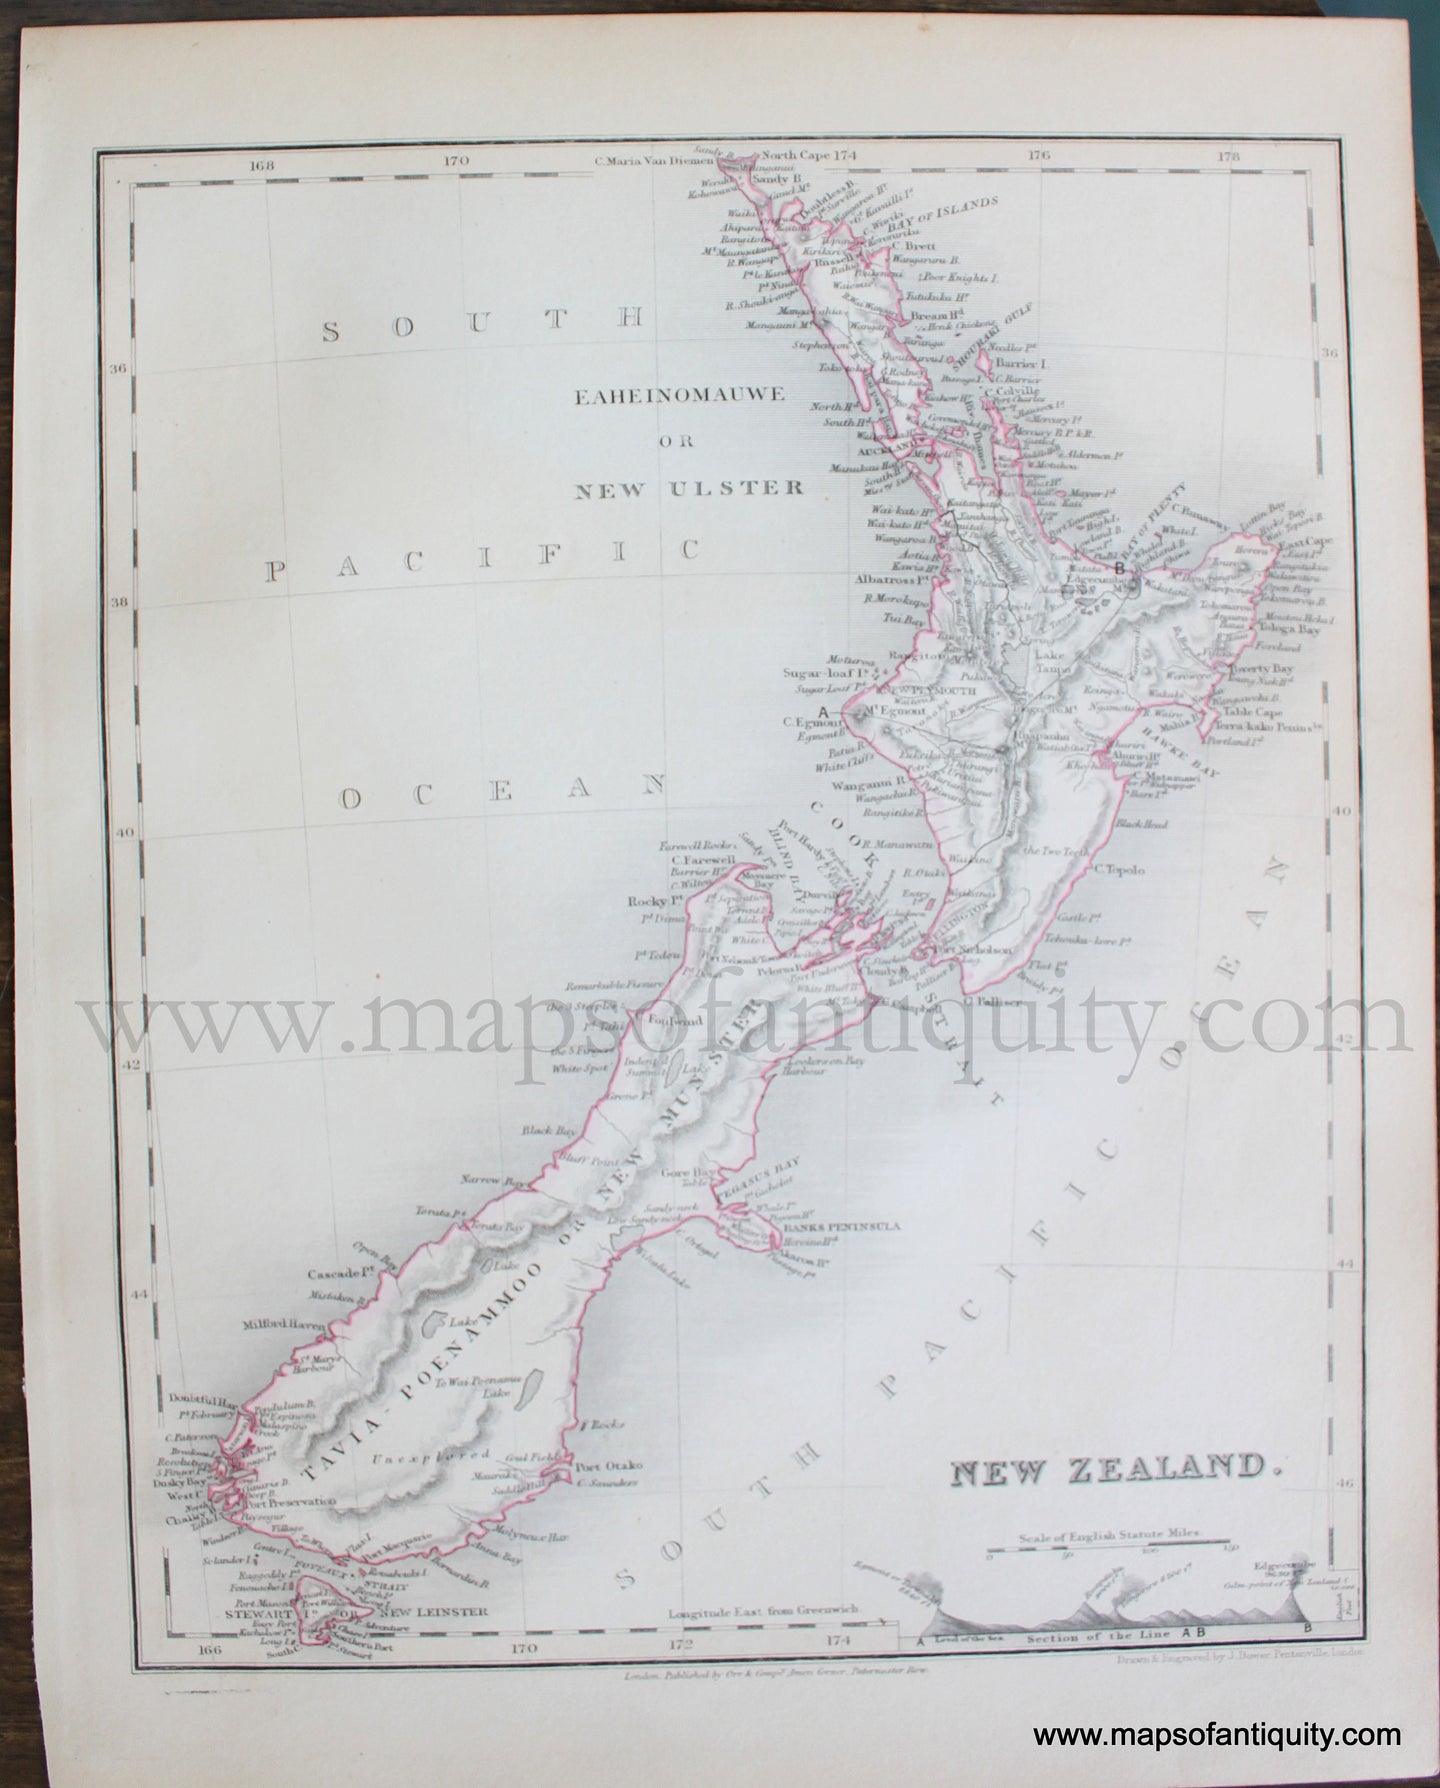 Genuine-Antique-Map-New-Zealand-Australia-&-Pacific--1850-Petermann-/-Orr-/-Dower-Maps-Of-Antiquity-1800s-19th-century